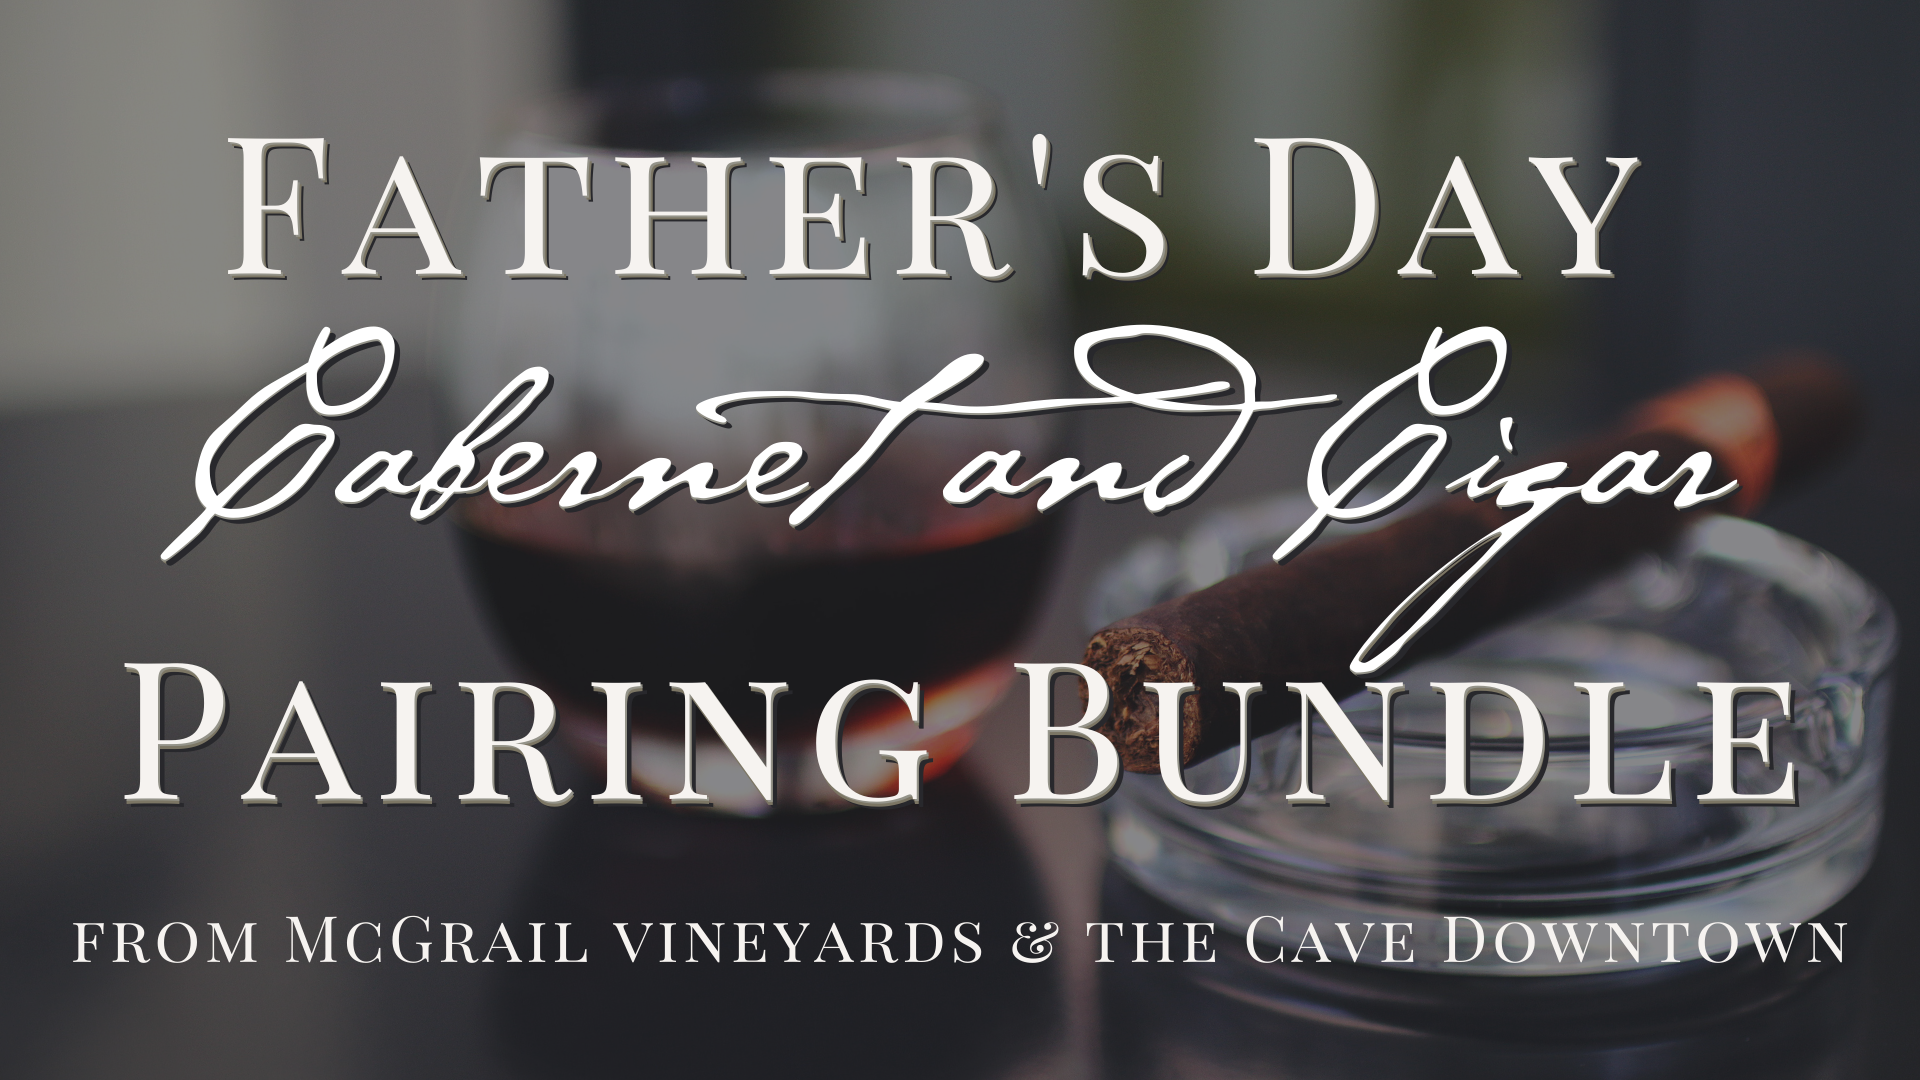 Father's Day Cigar & Cabernet Pairing Bundle from McGrail Vineyards & the Cave Downtown